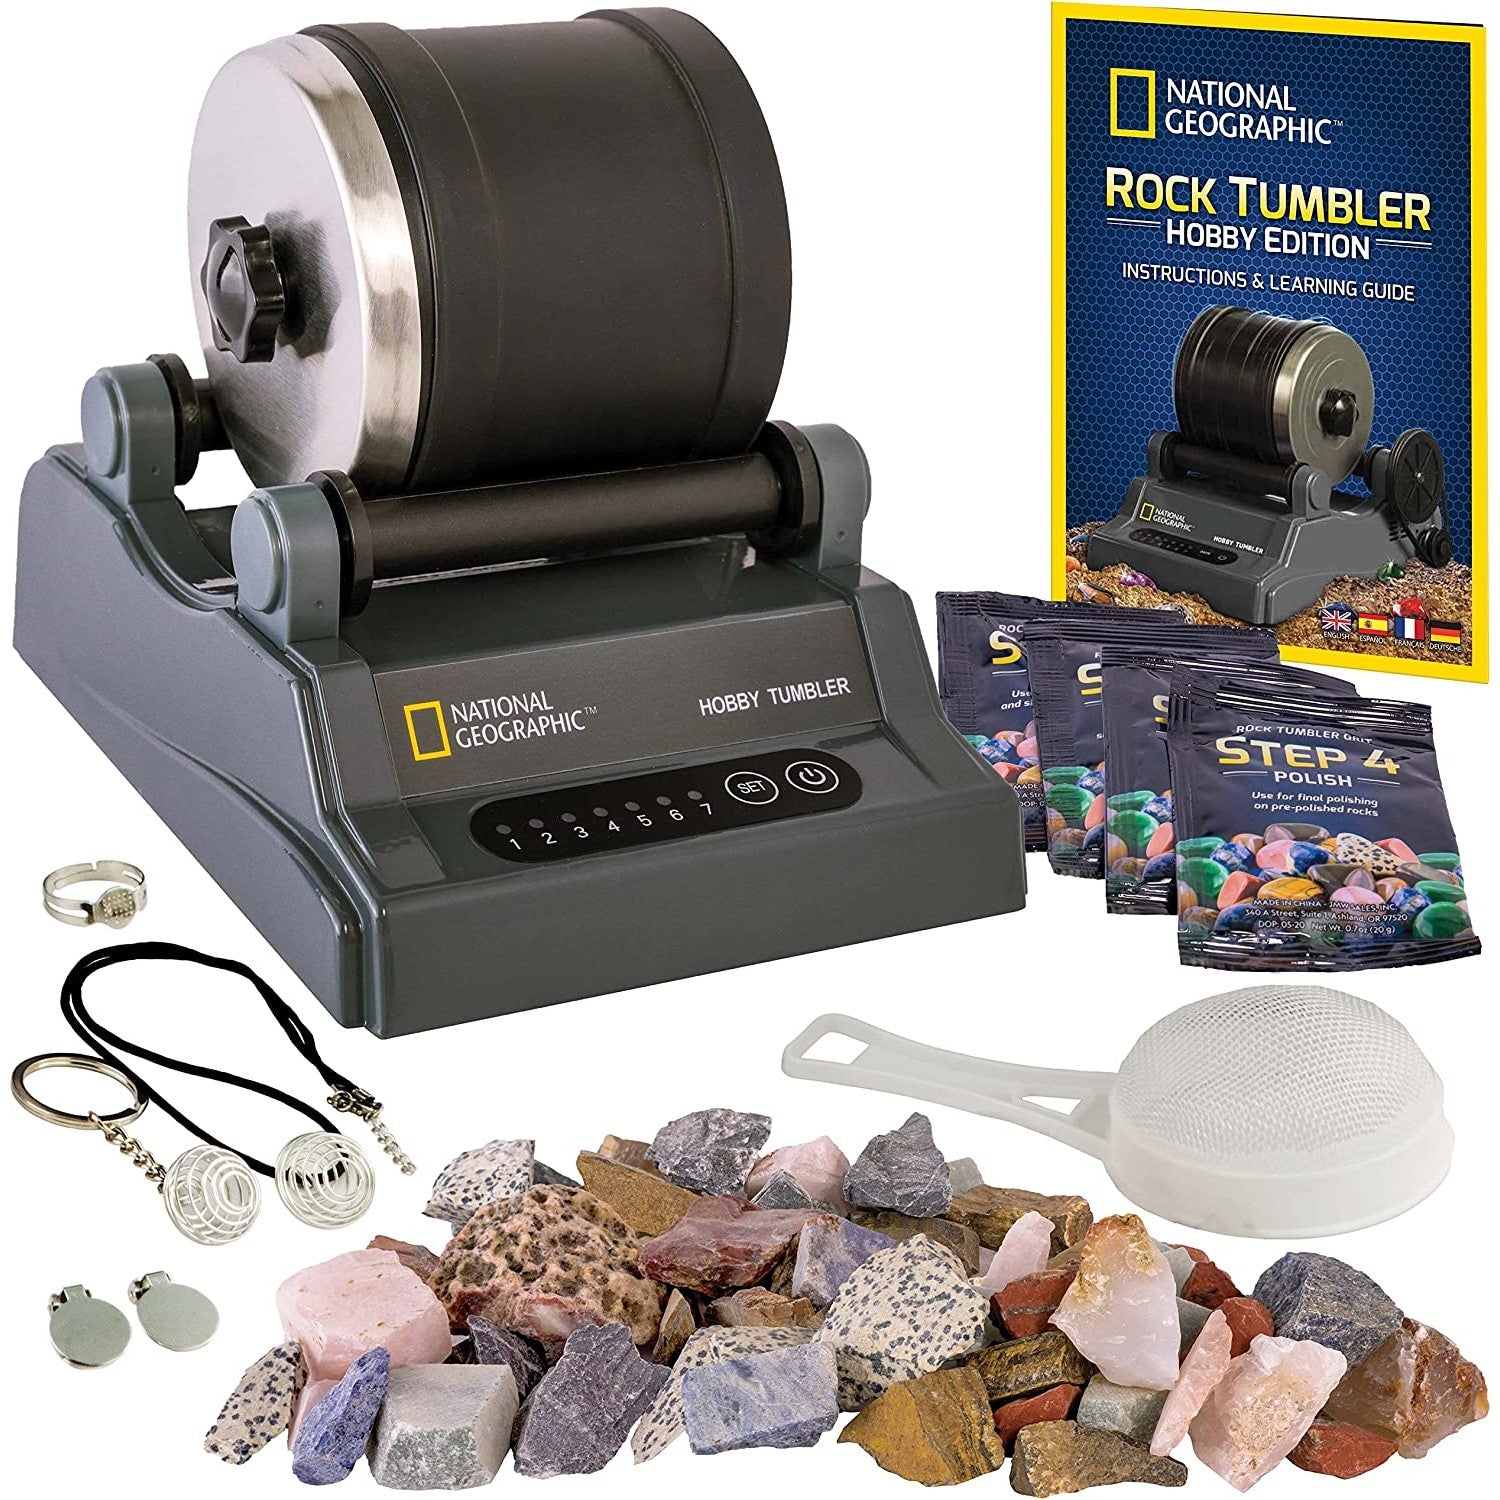 A rock tumbler kit by national Geographic and all the accessories that are included.